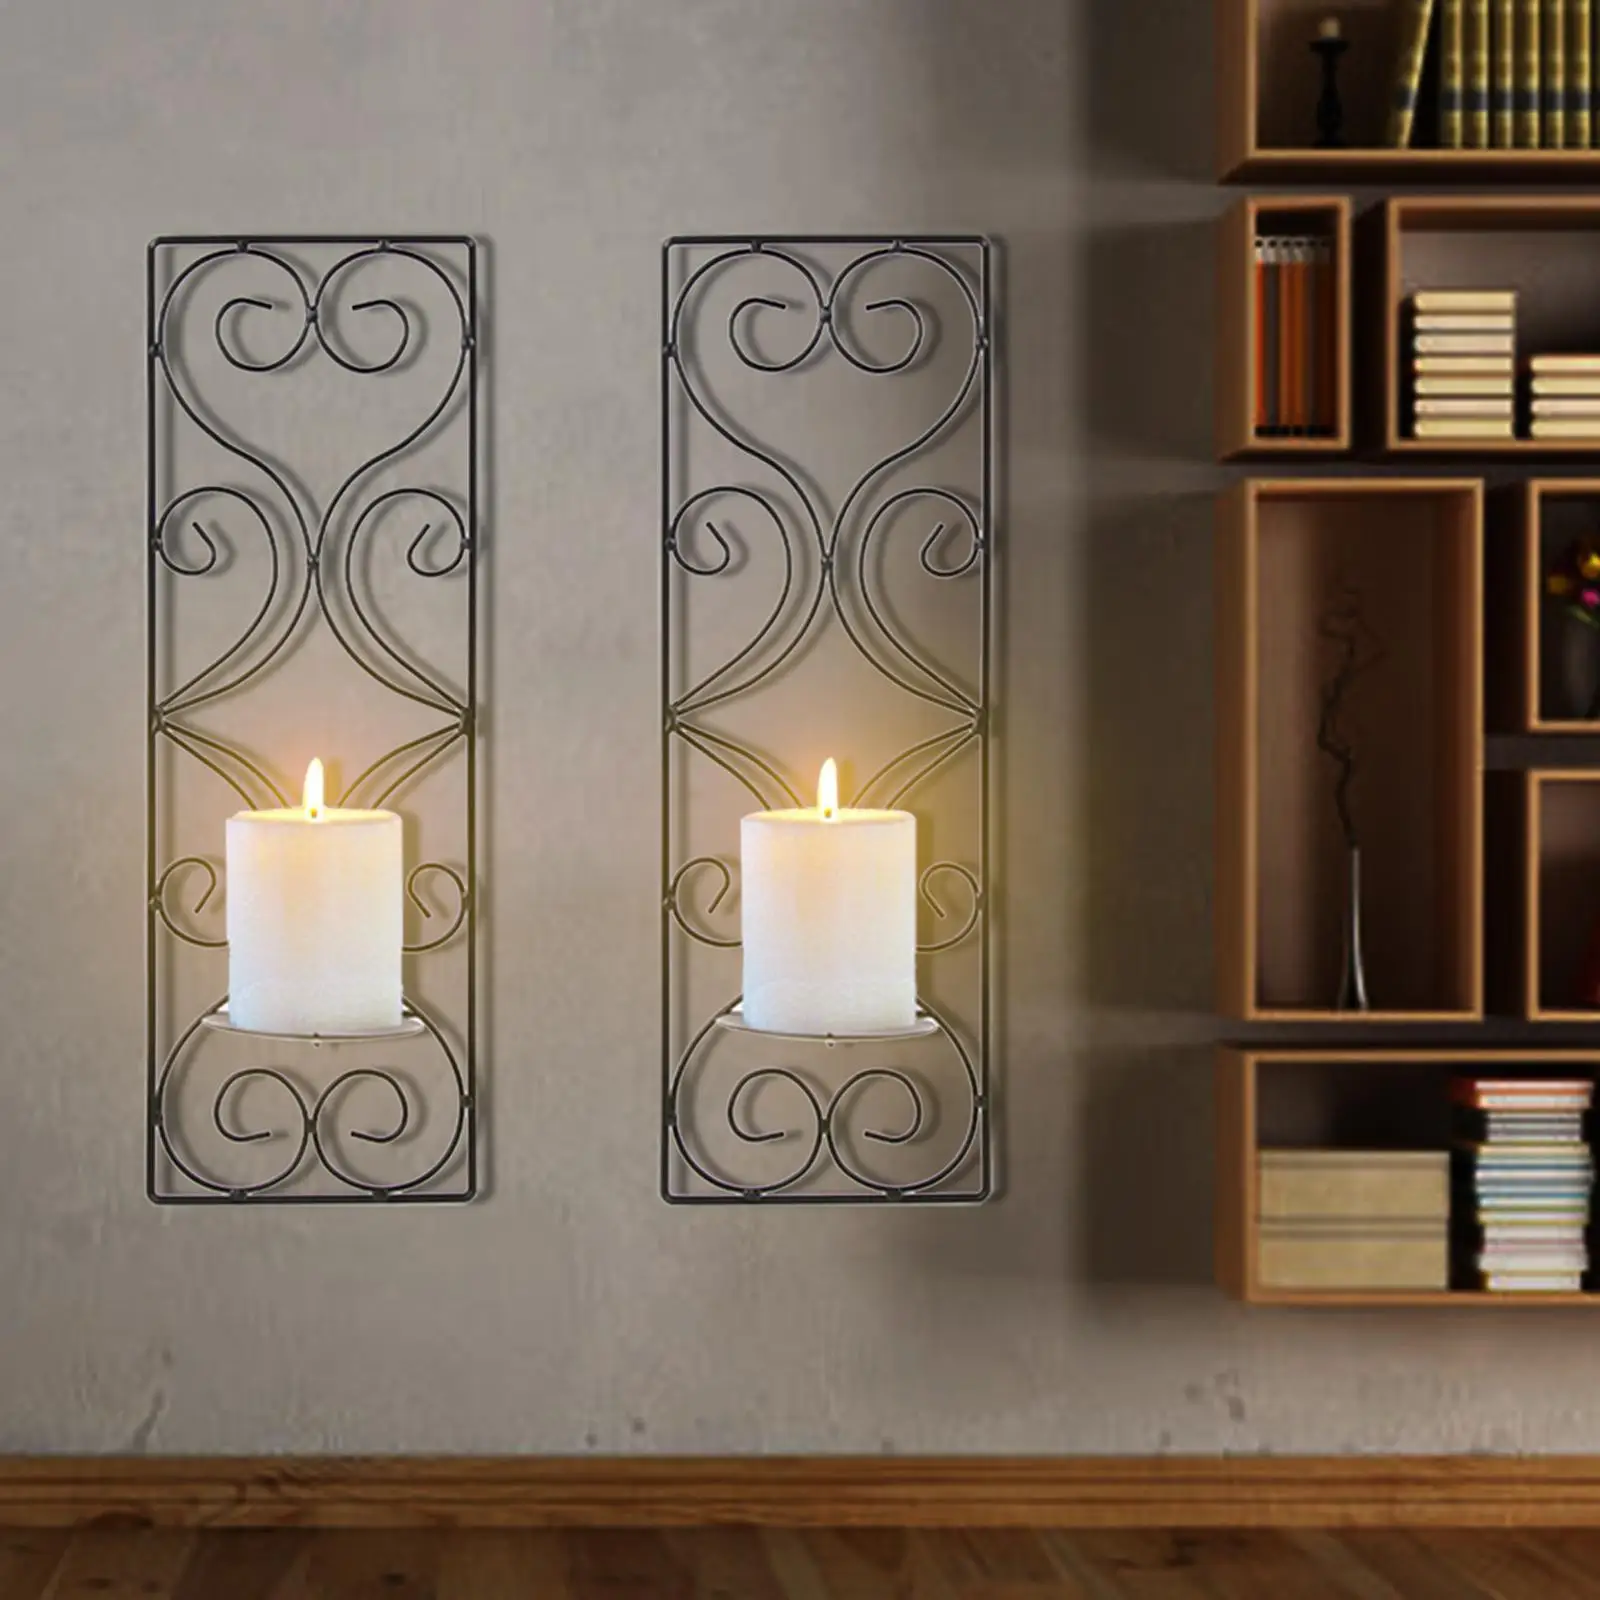 2 Pieces European Sconce Candle Holder Wall Mounted Shelving Classicall Wall Art Hanging for Dining Room Bathroom Pathway Porch